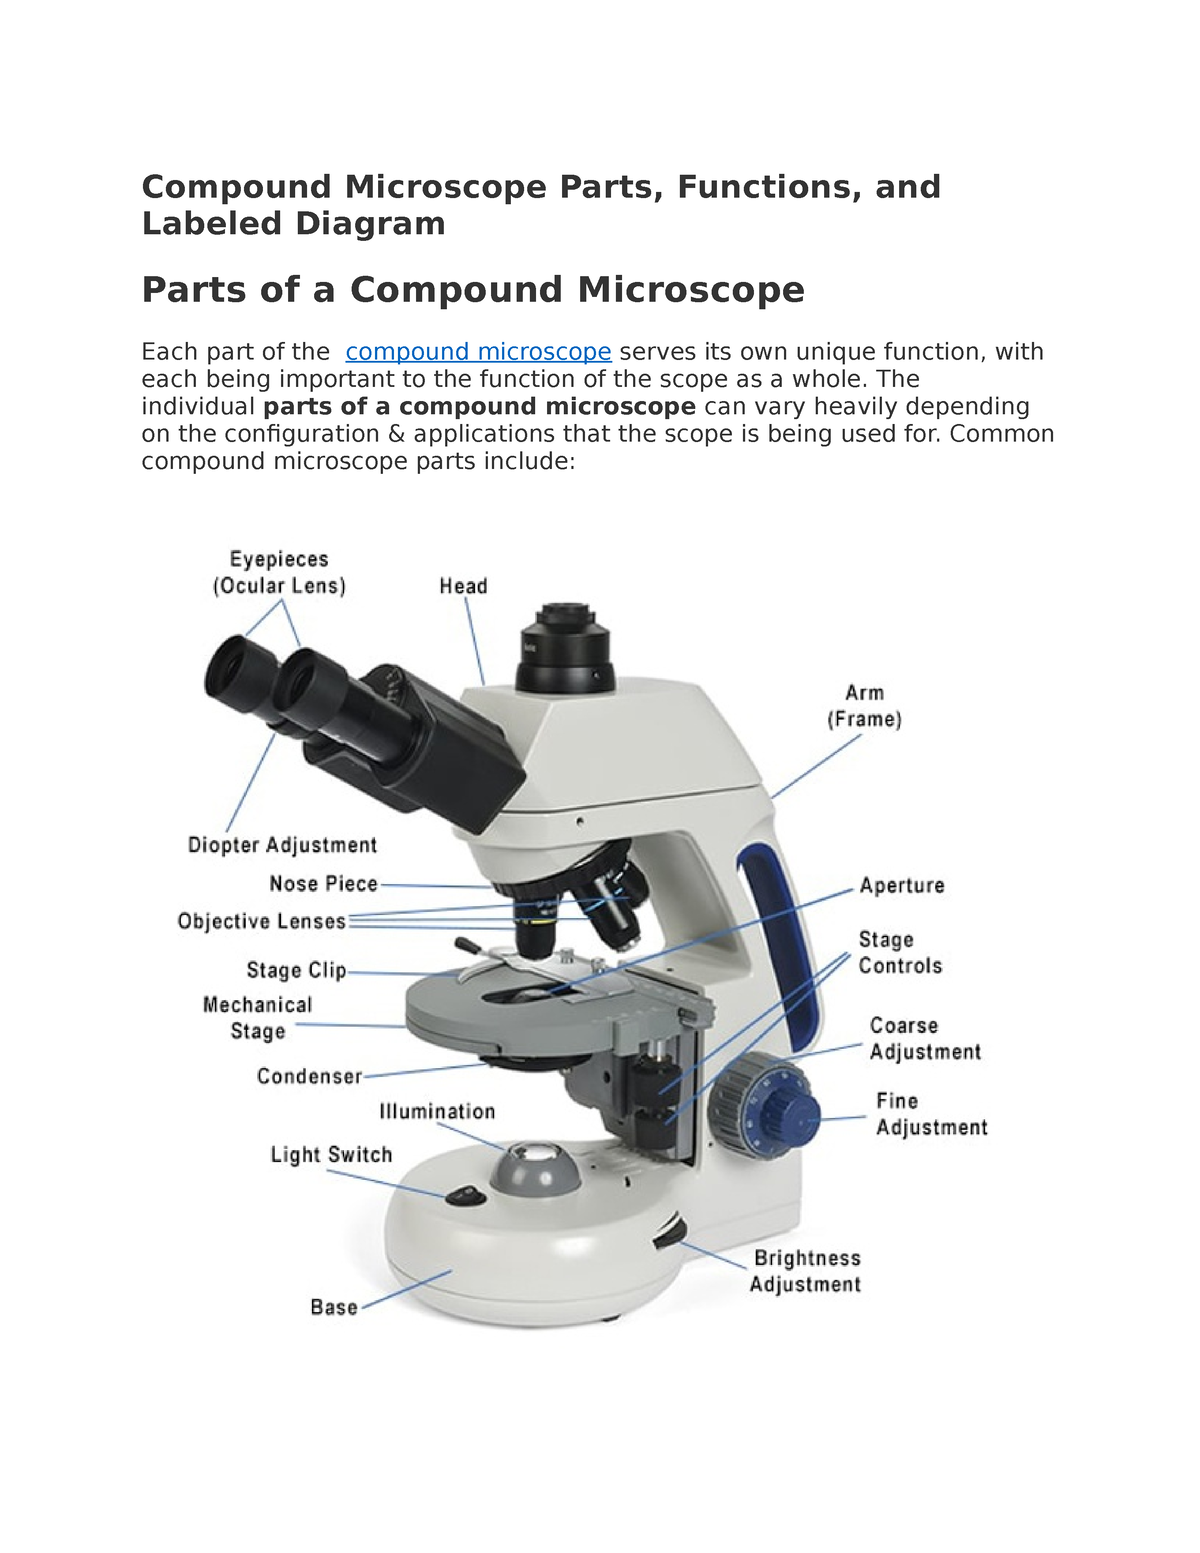 Compound Microscope Parts - The individual parts of a compound ...